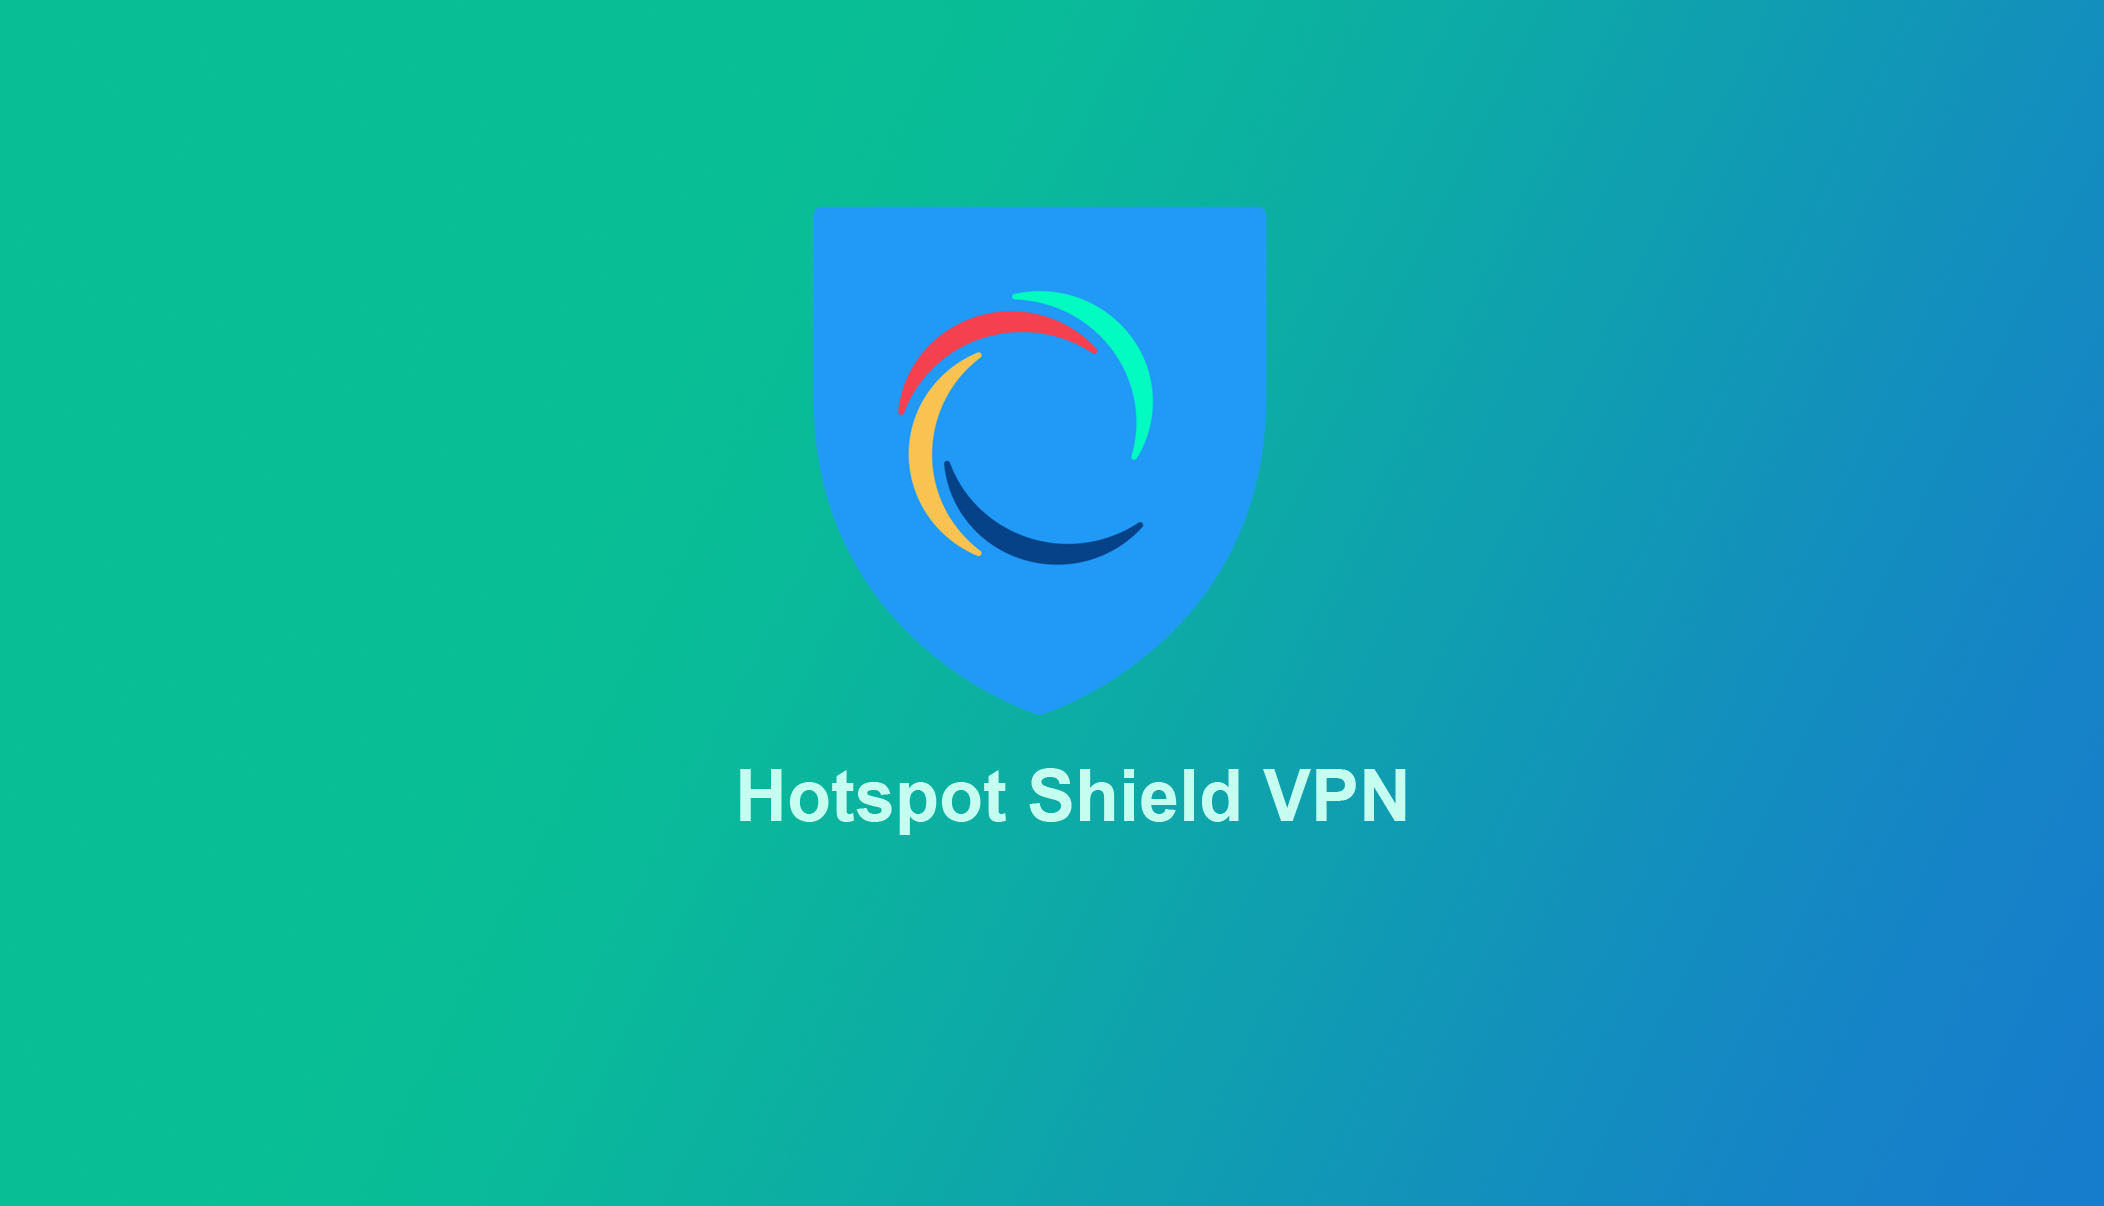 Download Hotspot Shield VPN Free Proxy for Windows, Mac, Android, iOS